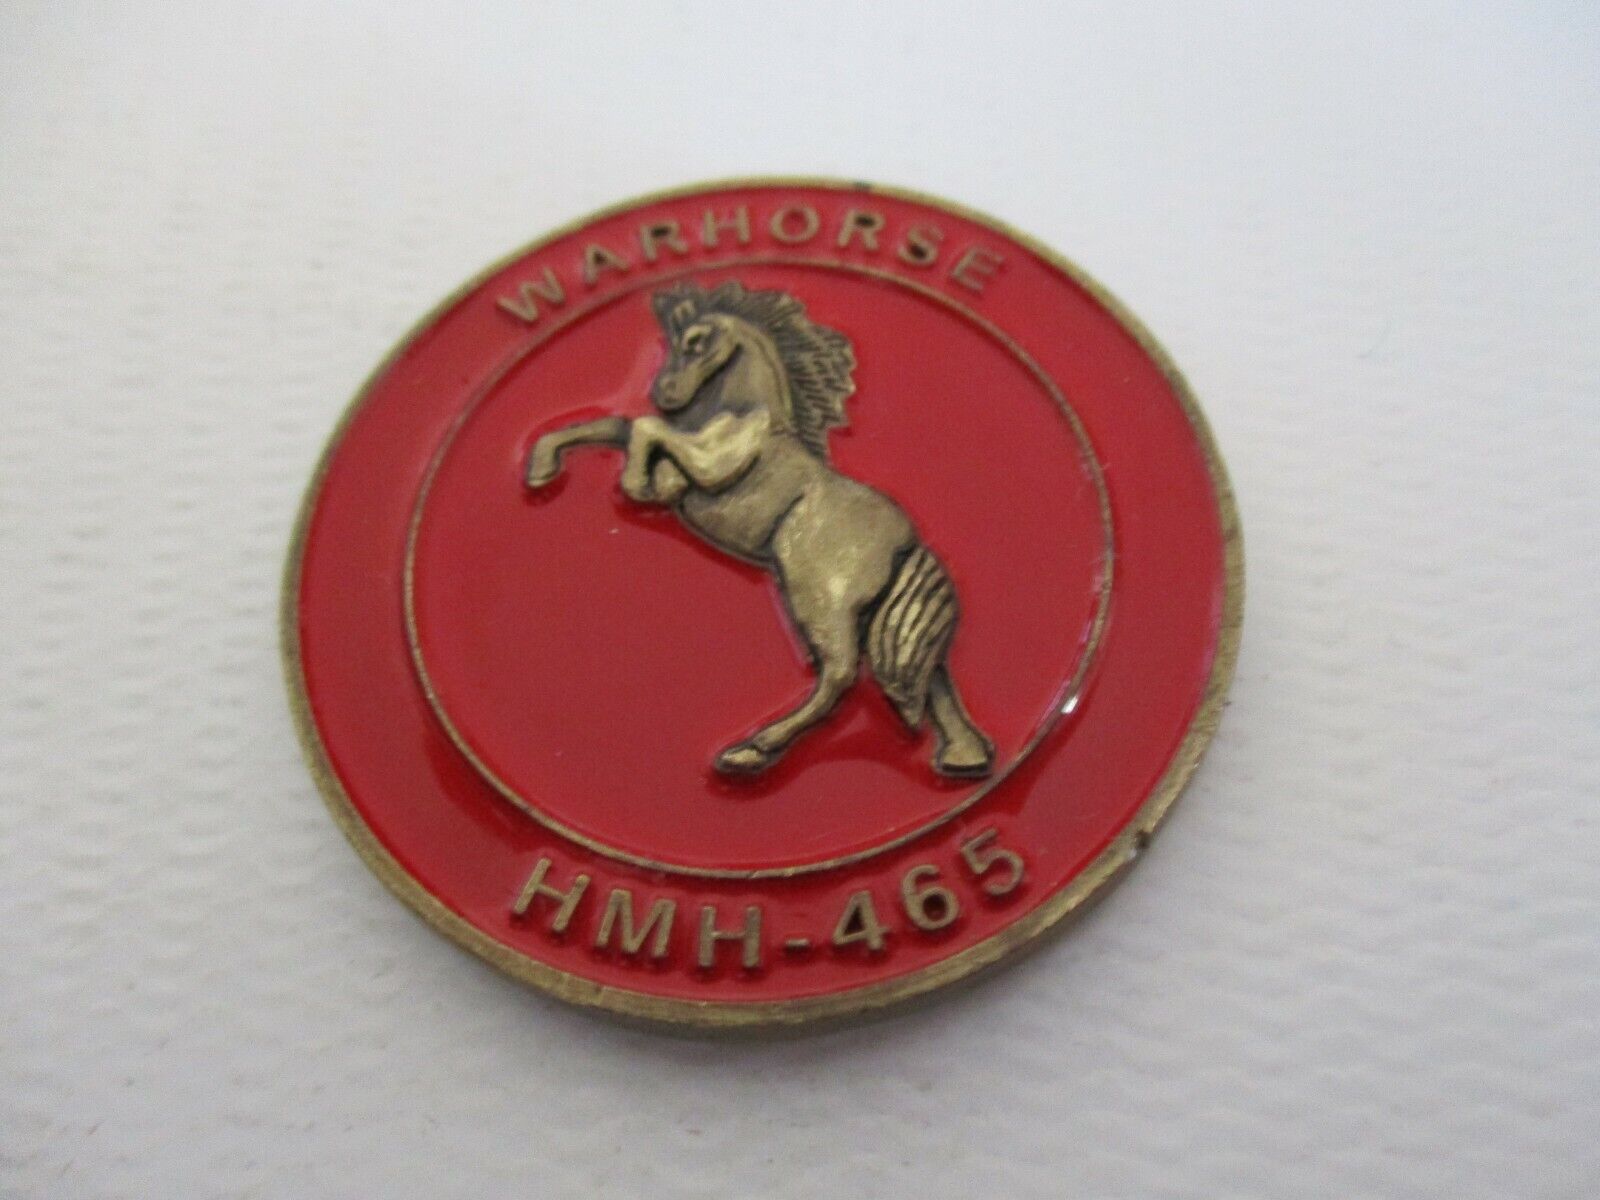 Marine Heavy Helicopter Squadron 465 War Horse HMH-465 USMC Challenge Coin 2